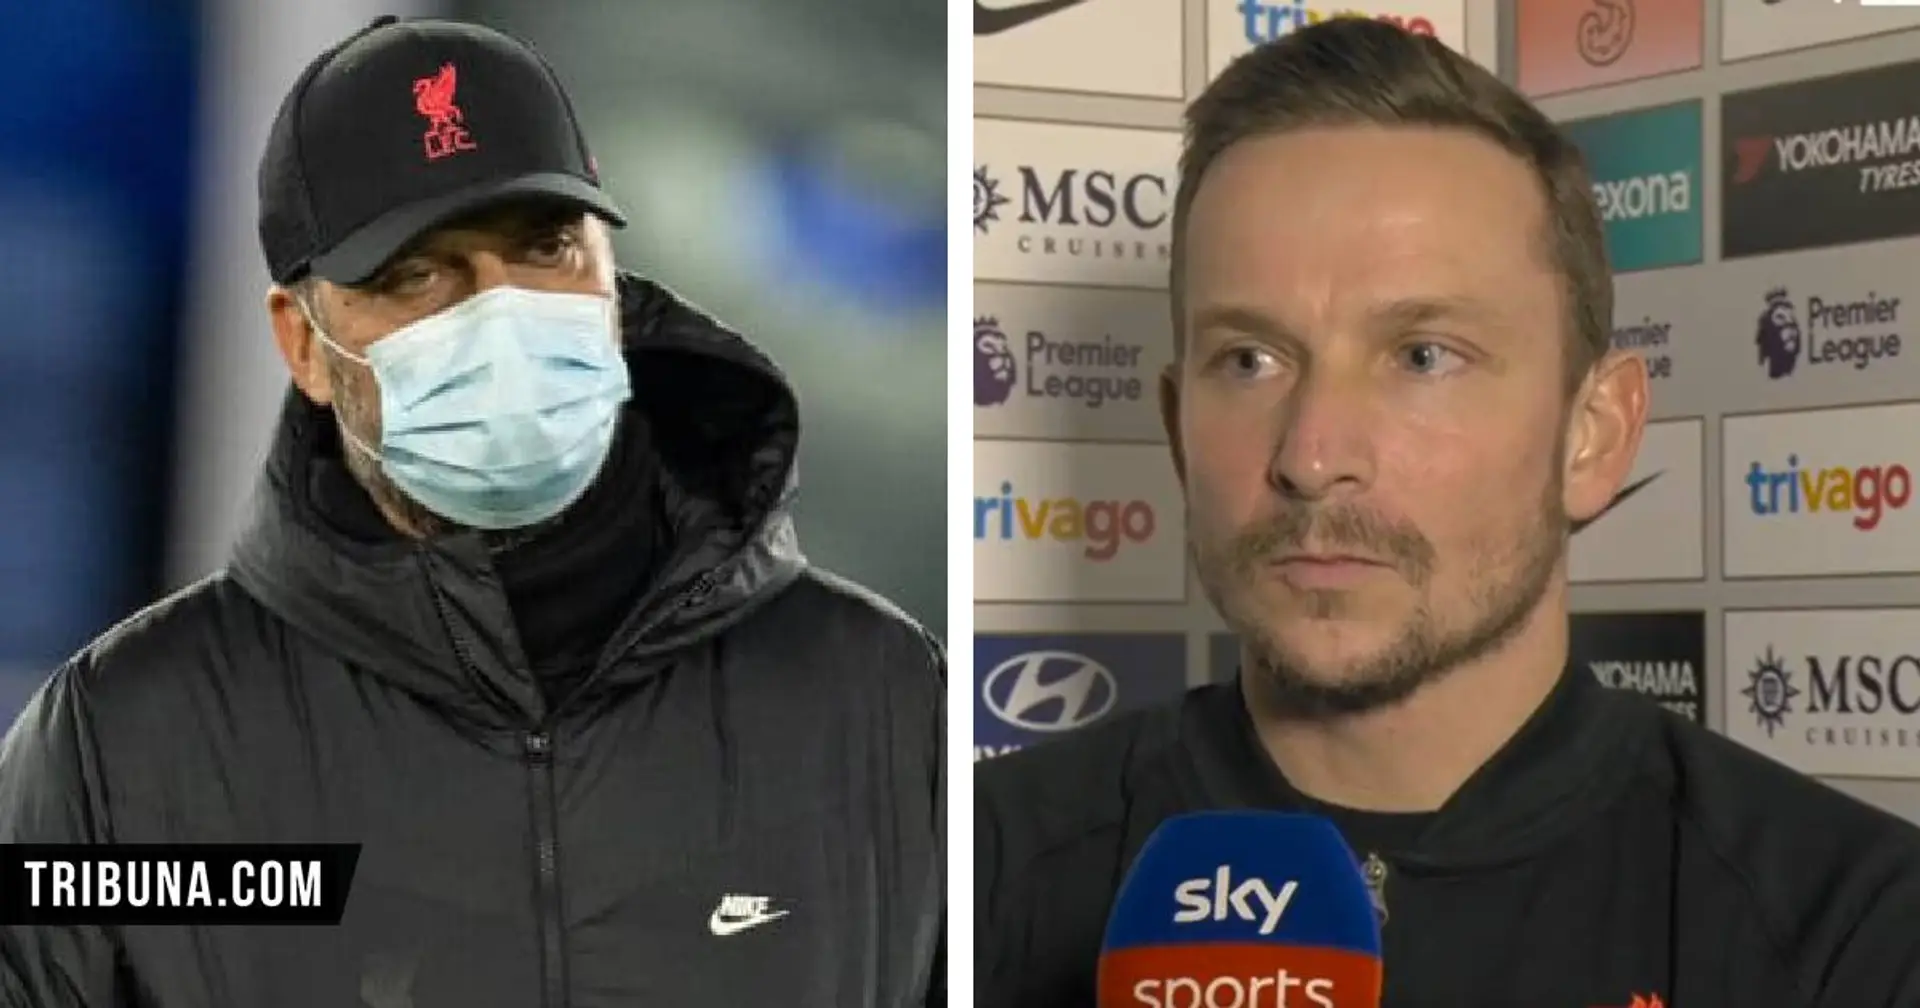 'He has mild symptoms': Lijnders confirms Klopp will not be on sidelines for Arsenal clash